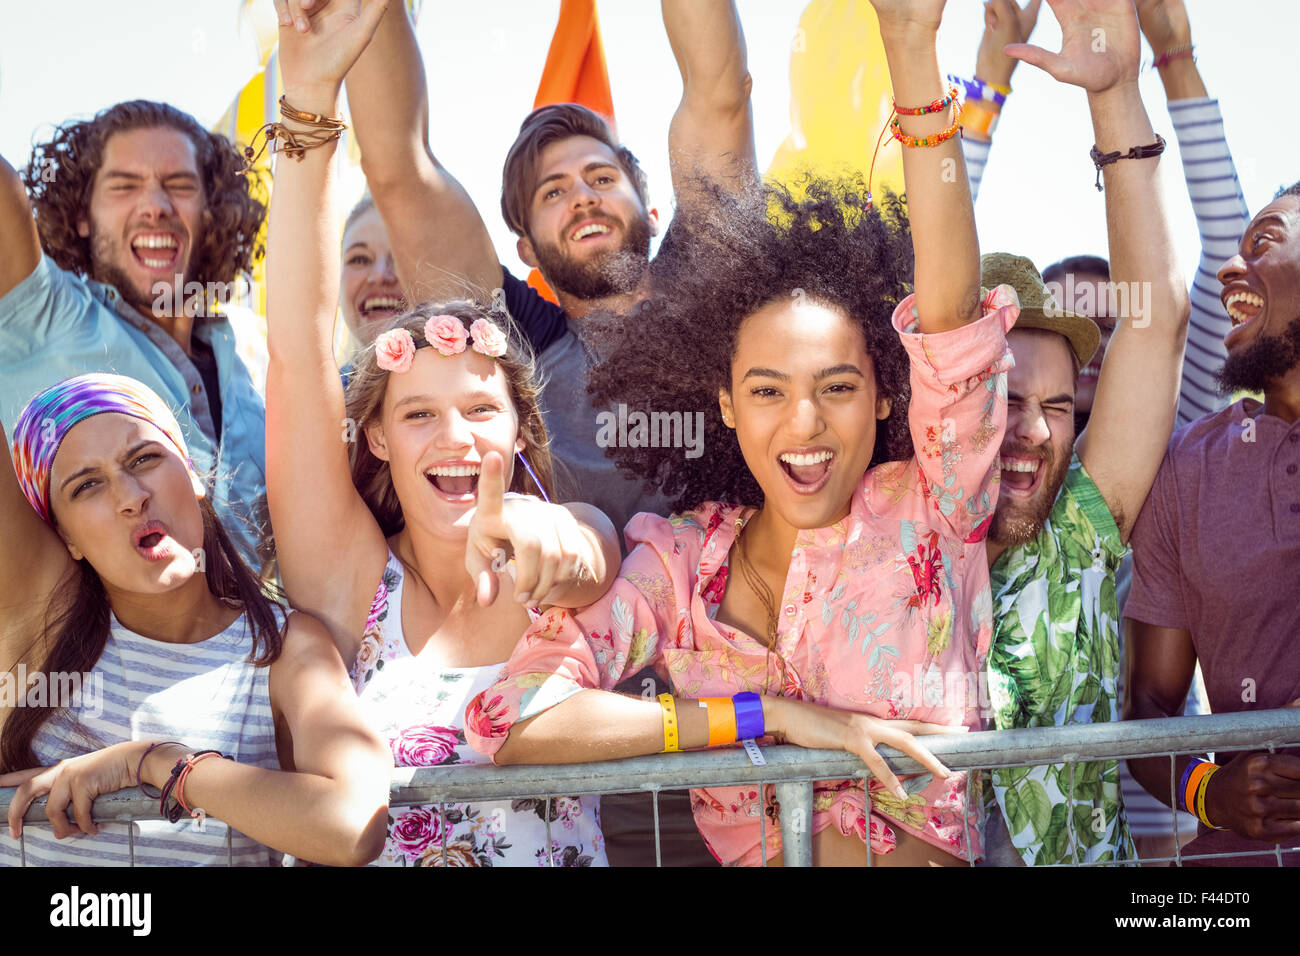 Excited young people singing along Stock Photo